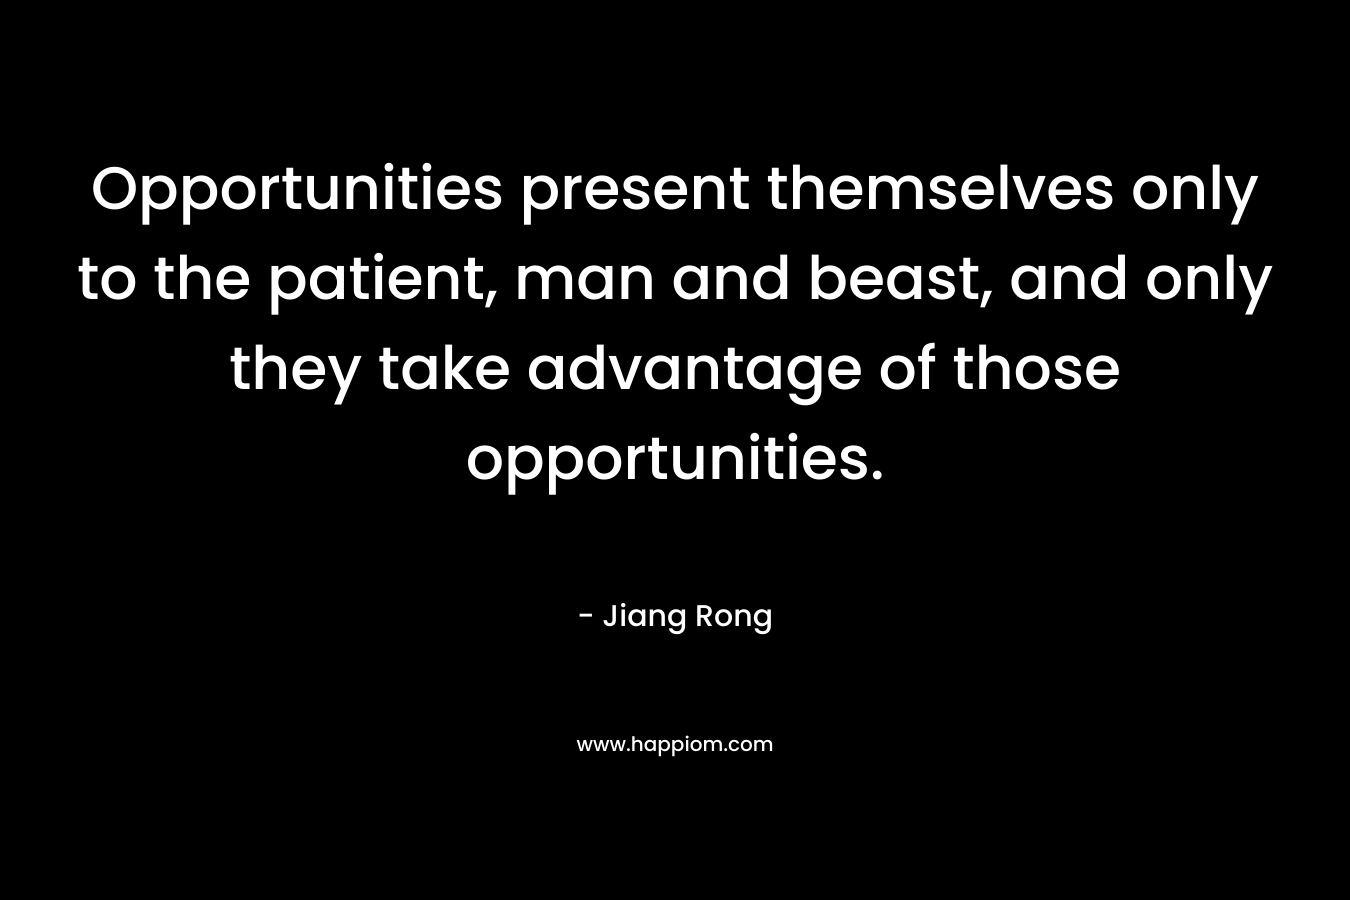 Opportunities present themselves only to the patient, man and beast, and only they take advantage of those opportunities.